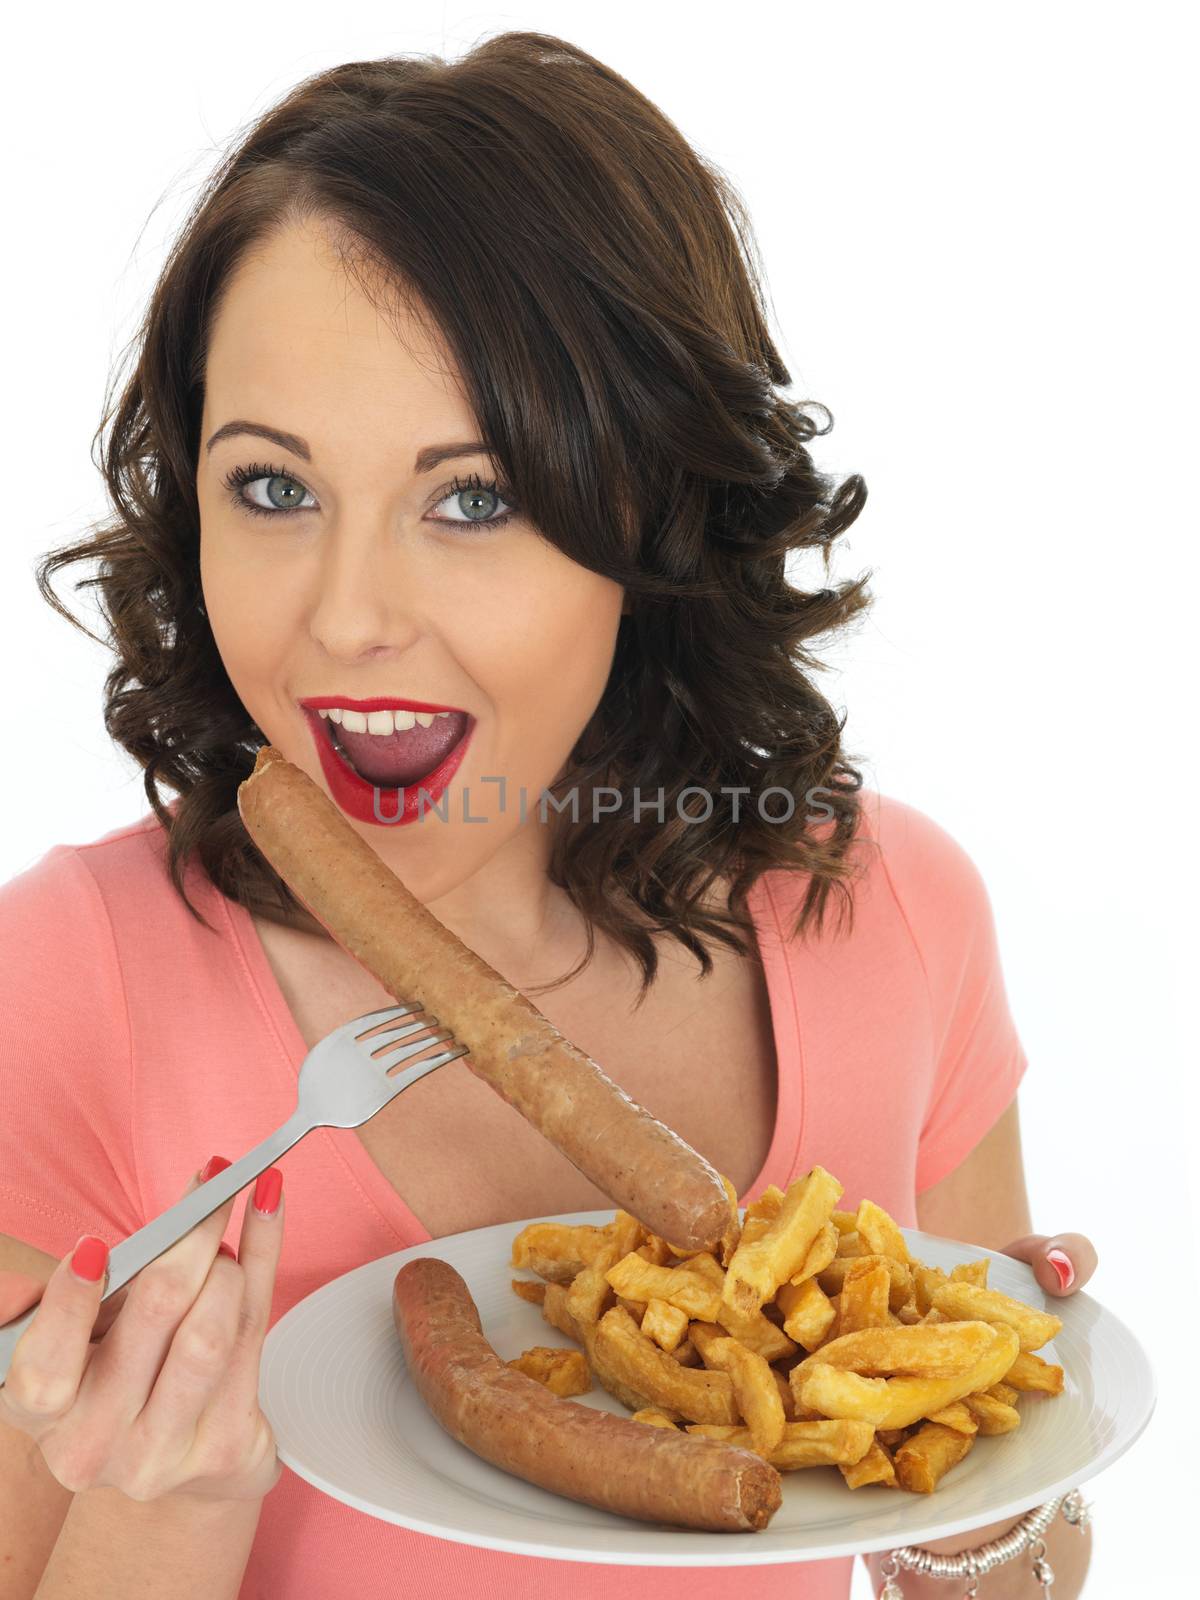 Young Woman Eating Jumbo Sausage and Chips by Whiteboxmedia